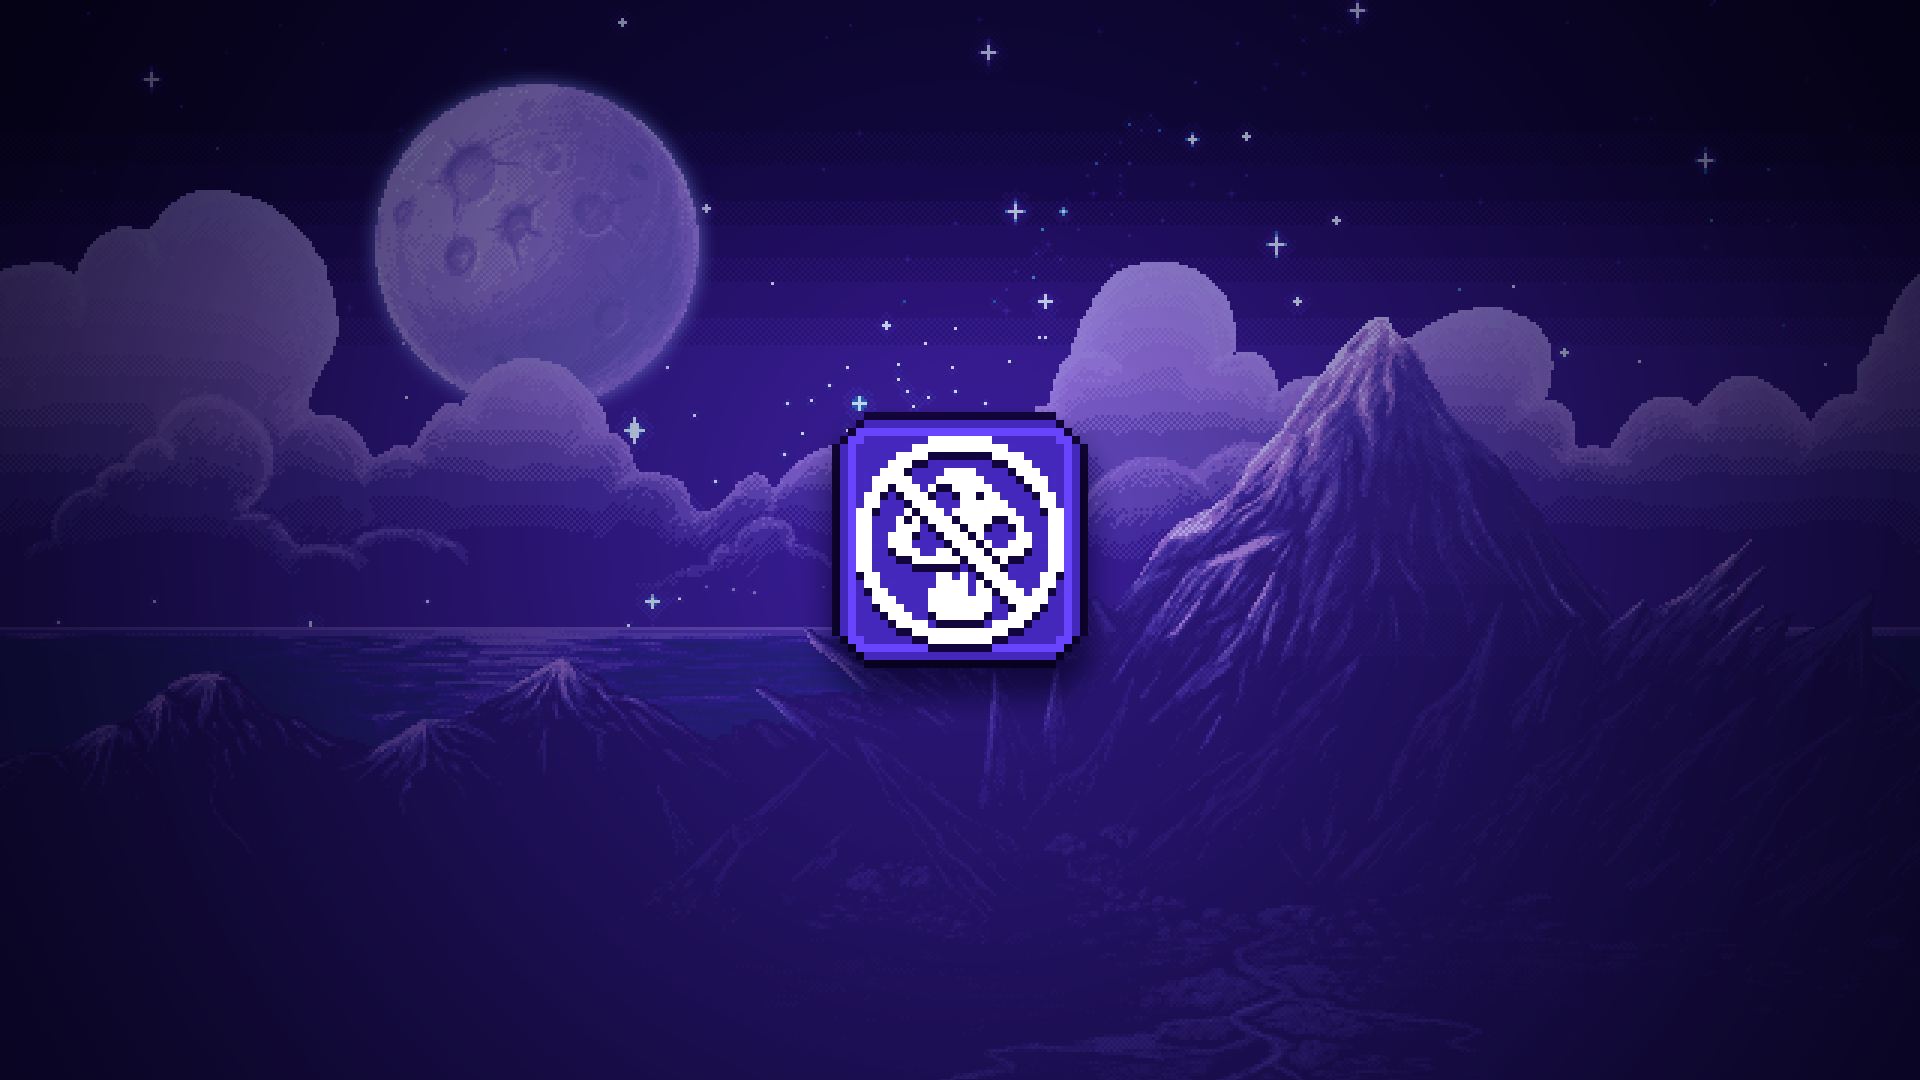 Icon for I Quill Survive